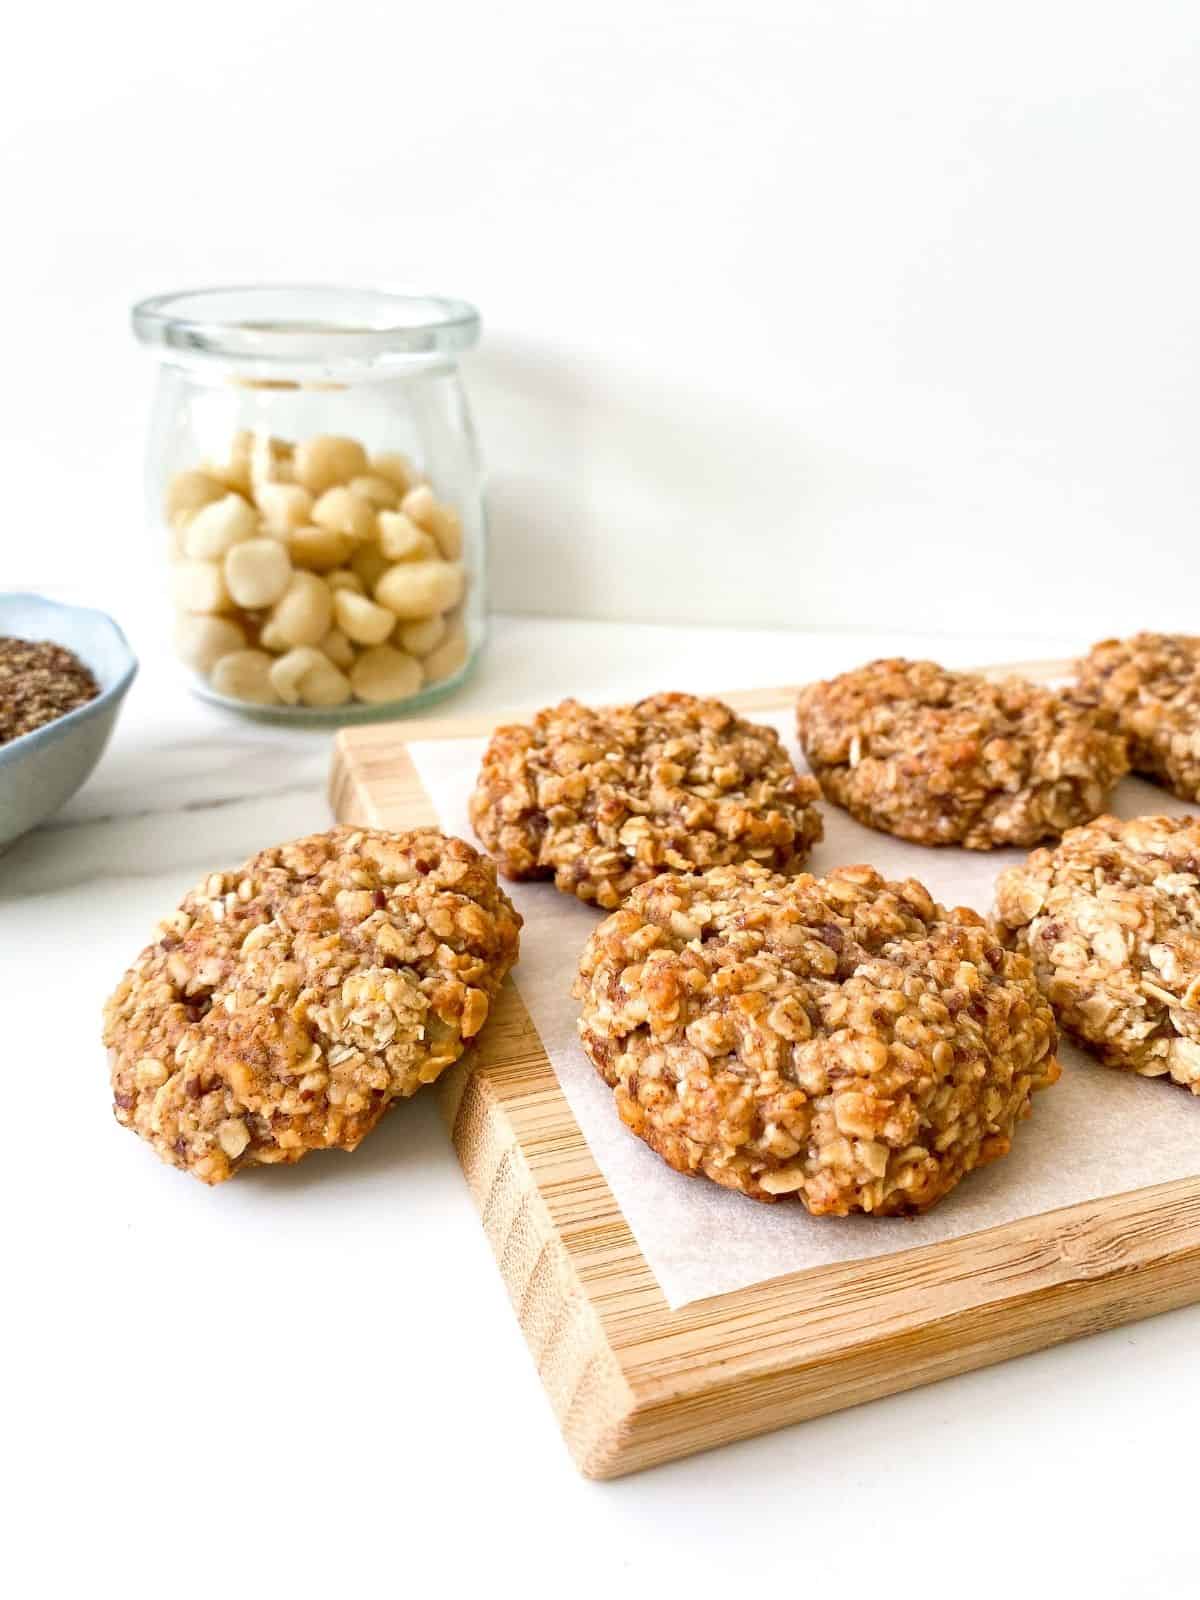 coconut macadamia nut cookies on a wooden board with a bowl of flax and jar of macadamias in the background.